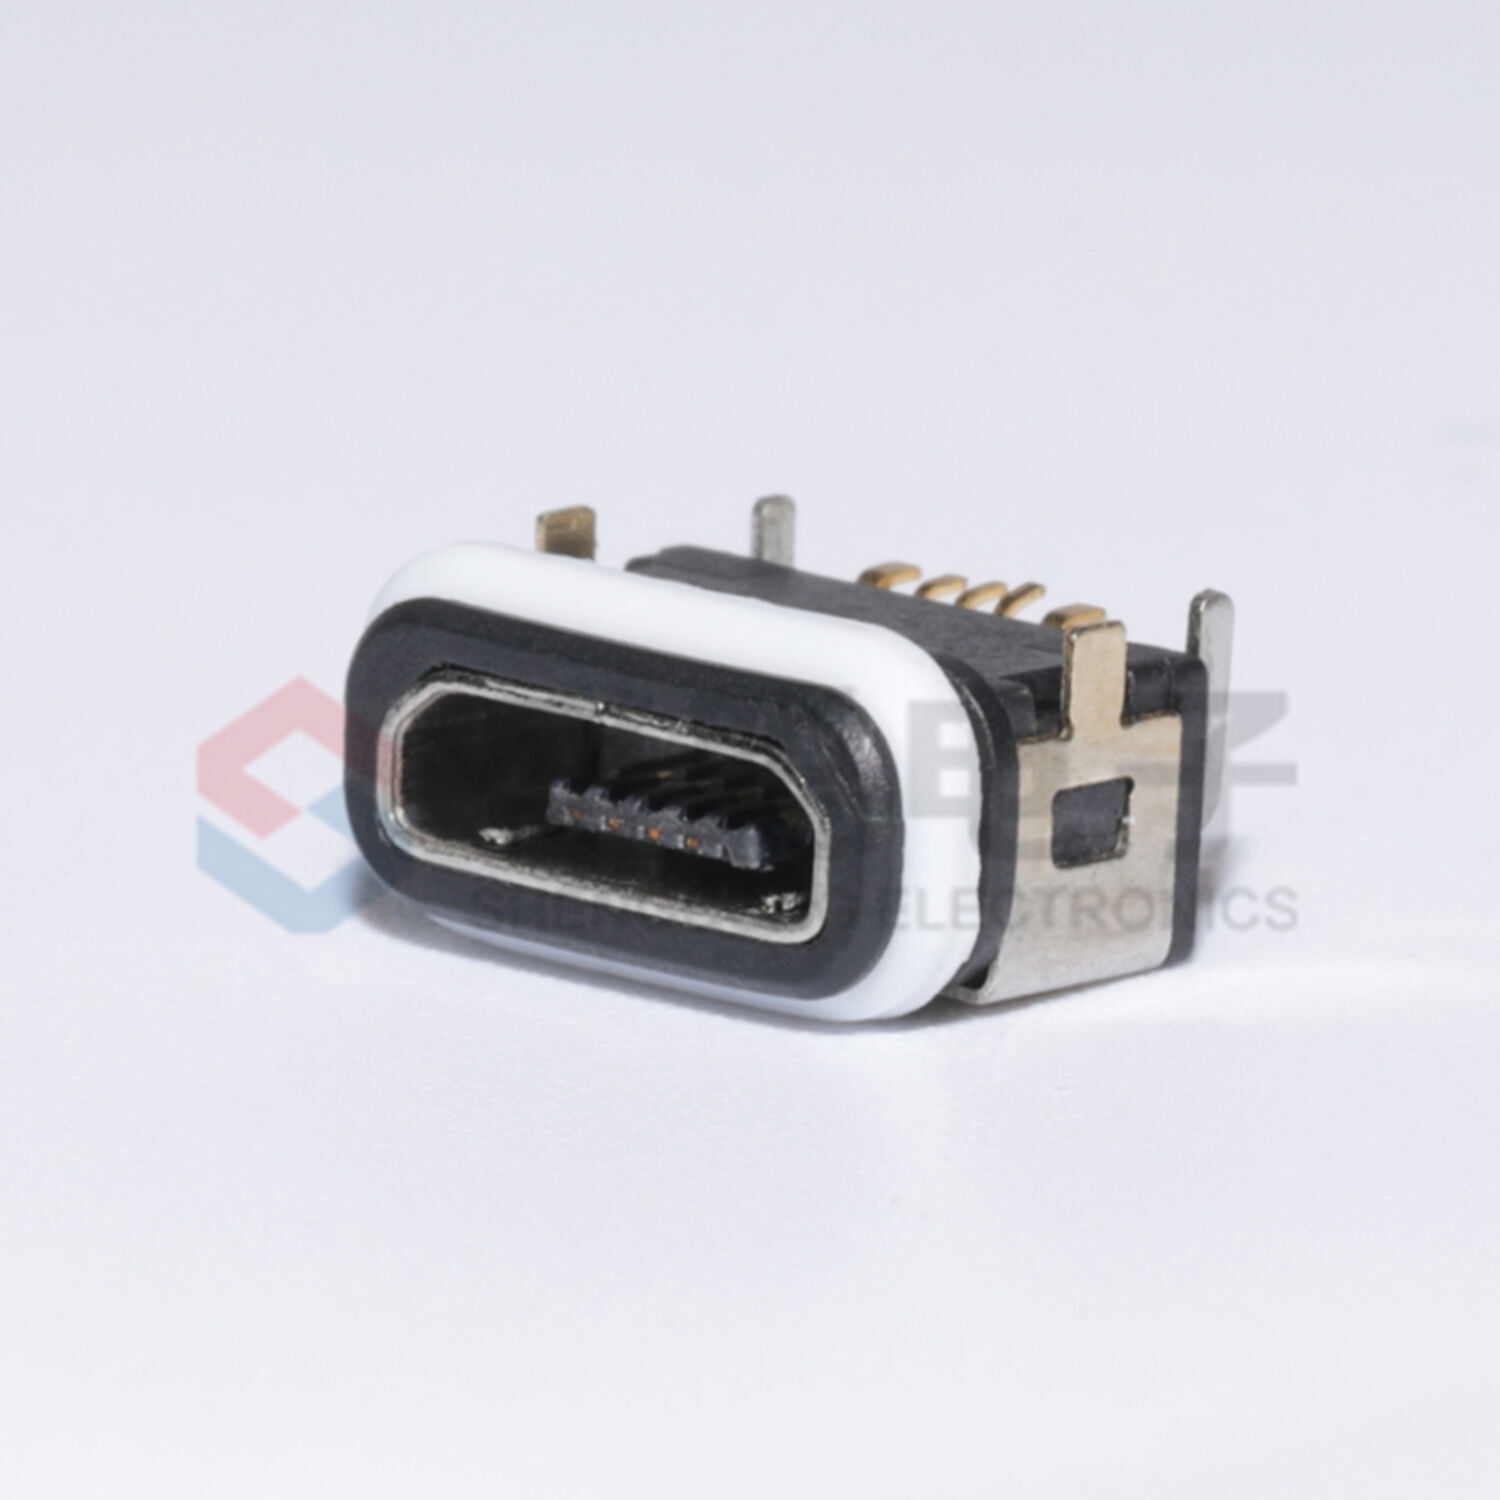 Micro USB Female to Mini USB 5-PIN Male Adapter Converter Cable Data  Charging AU